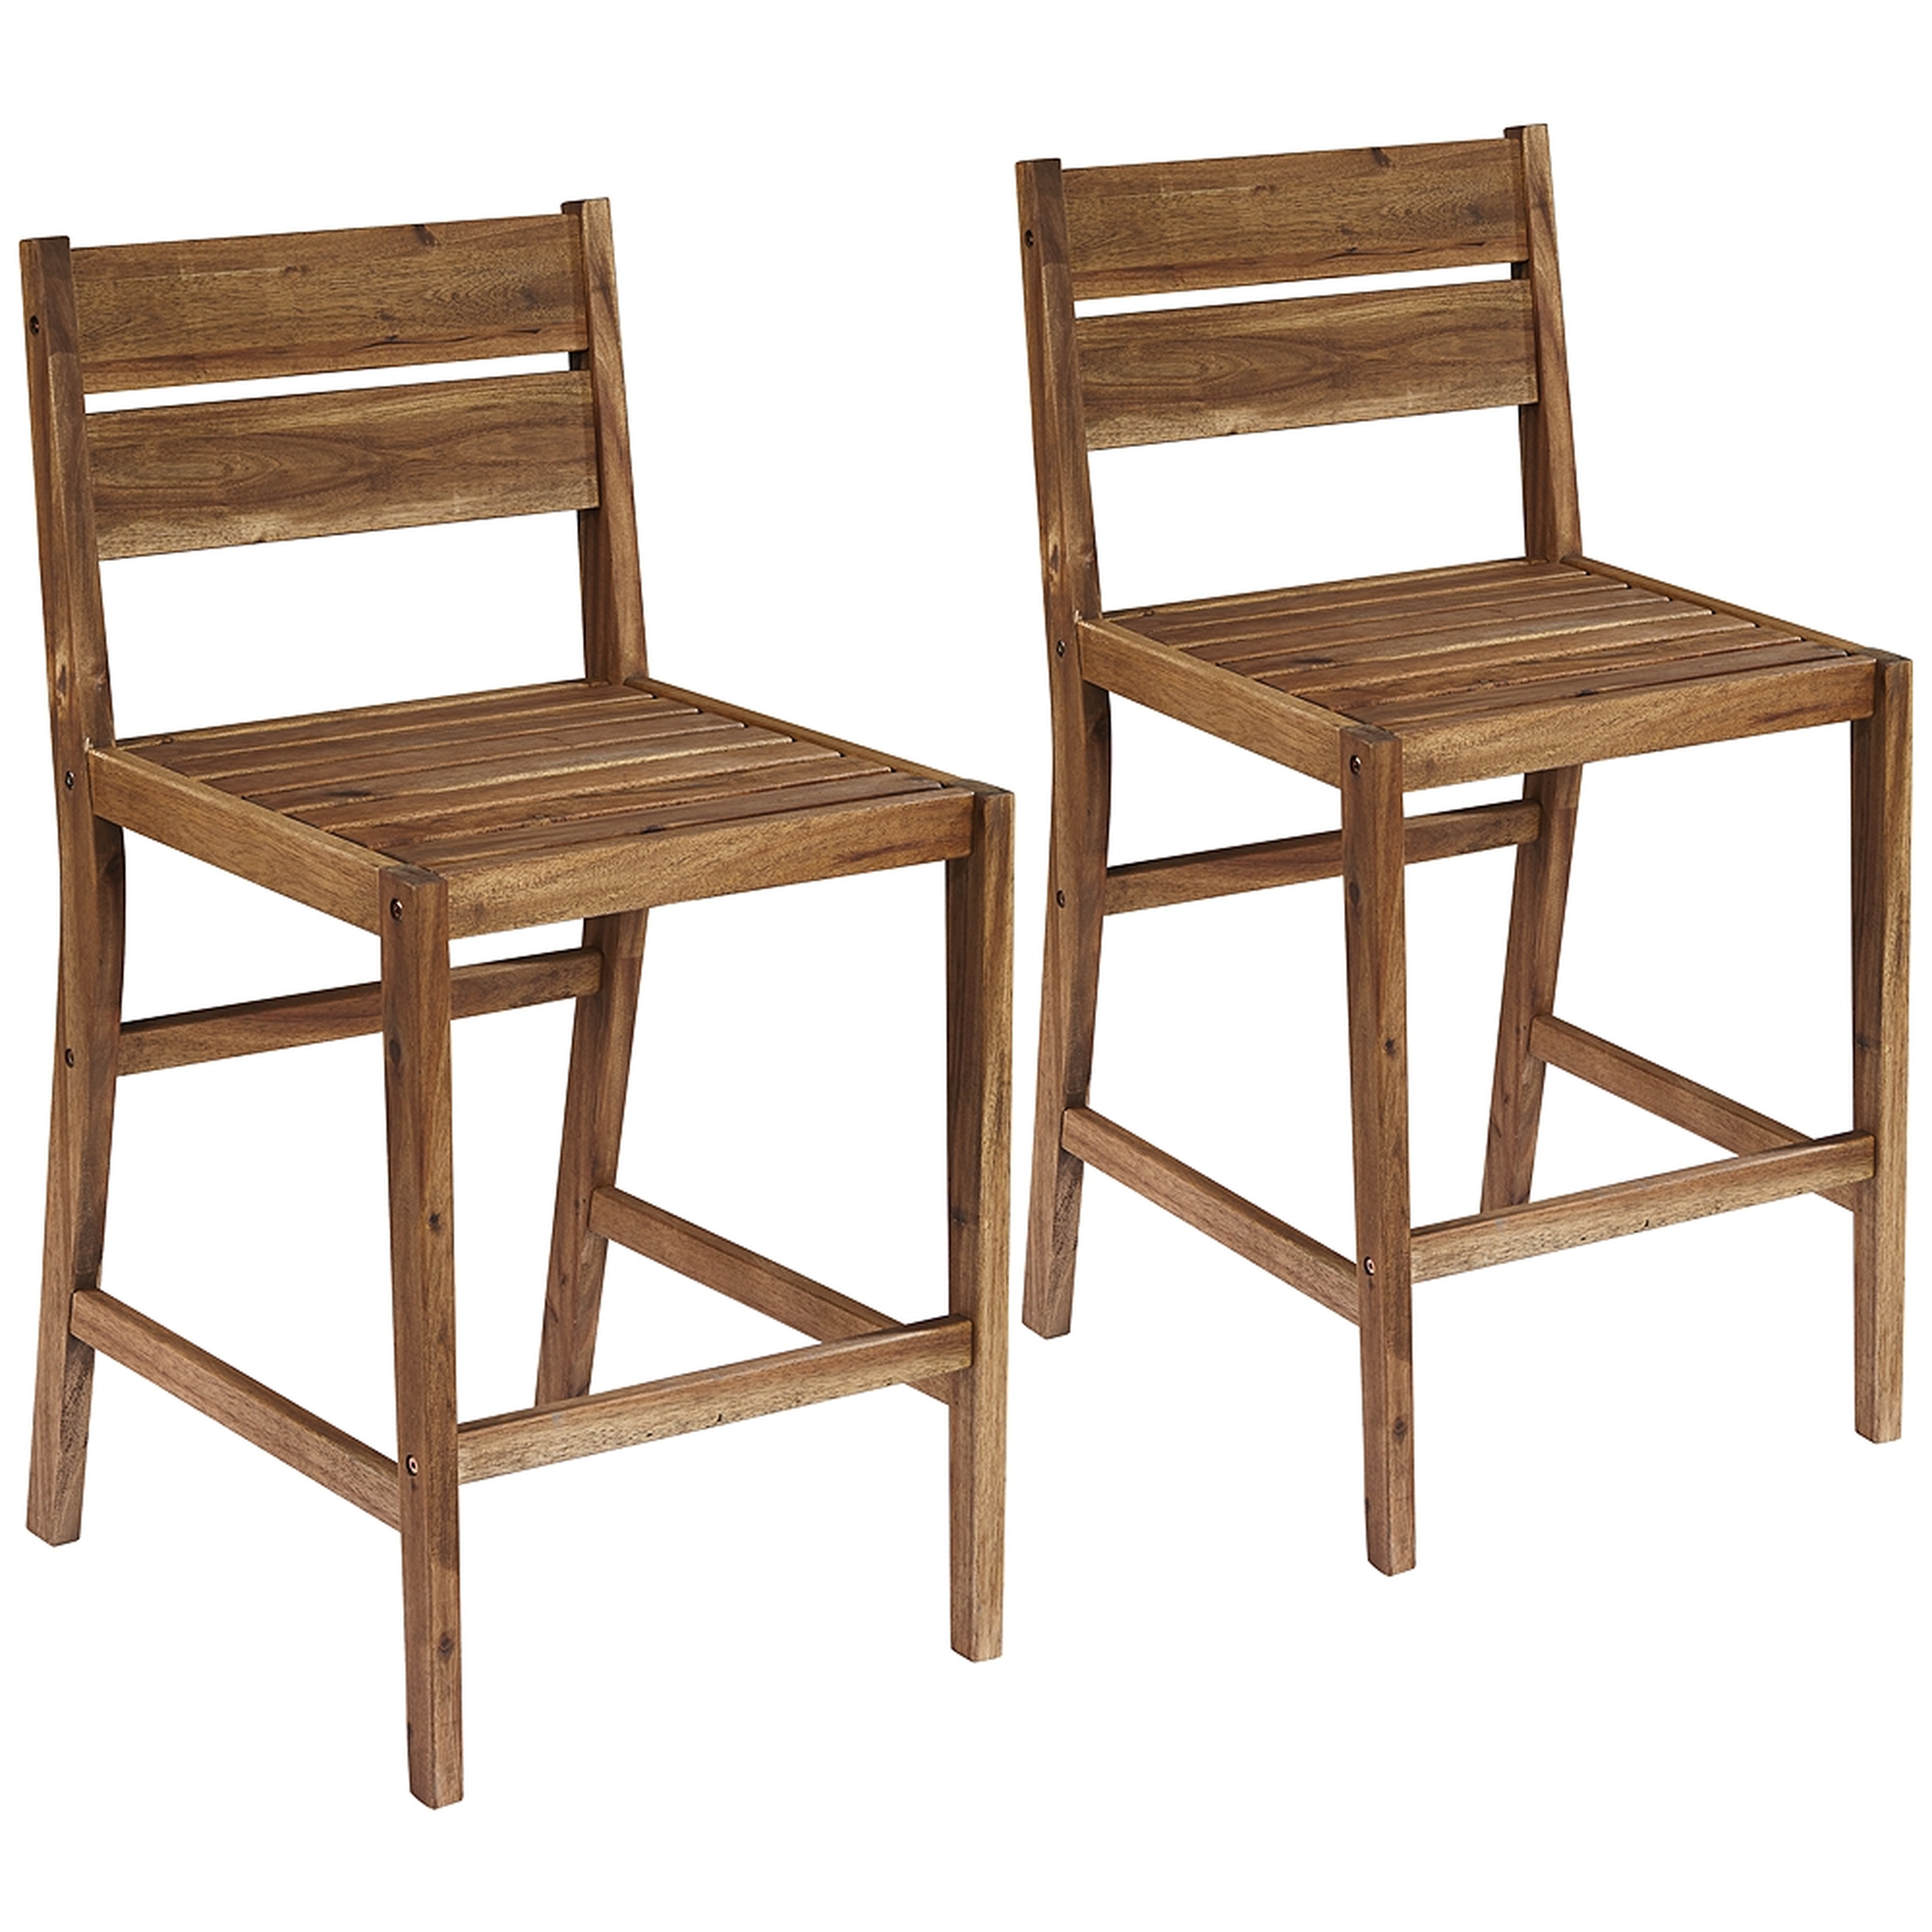 Nova 24" Natural Wood Outdoor Counter Stools Set of 2 - Style # 78X16 - Lamps Plus